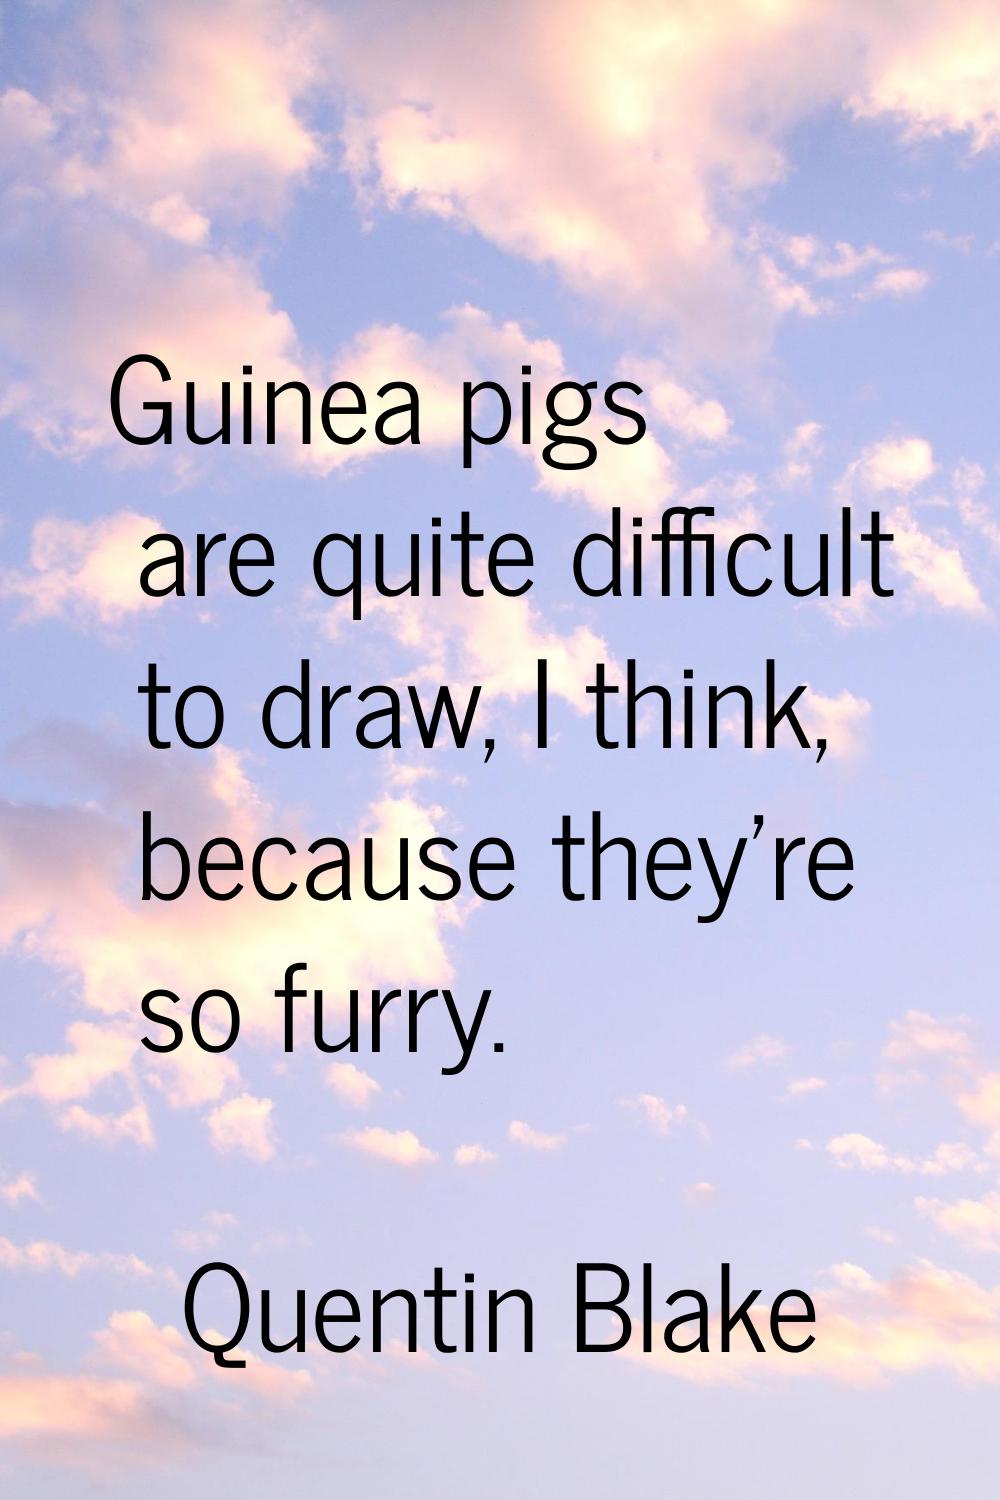 Guinea pigs are quite difficult to draw, I think, because they're so furry.